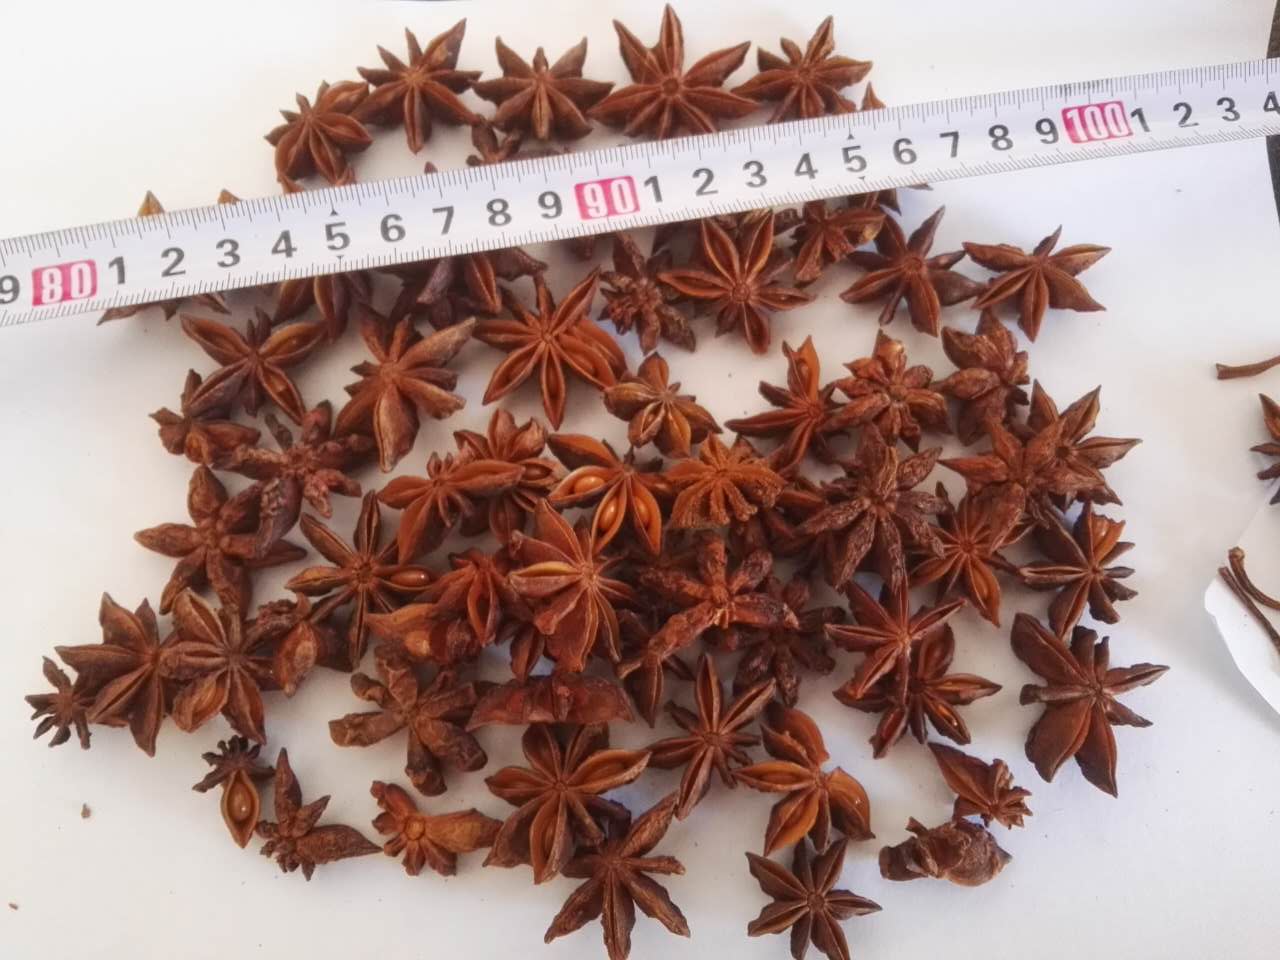 Chinese New crop dried natural aniseed/ star anise